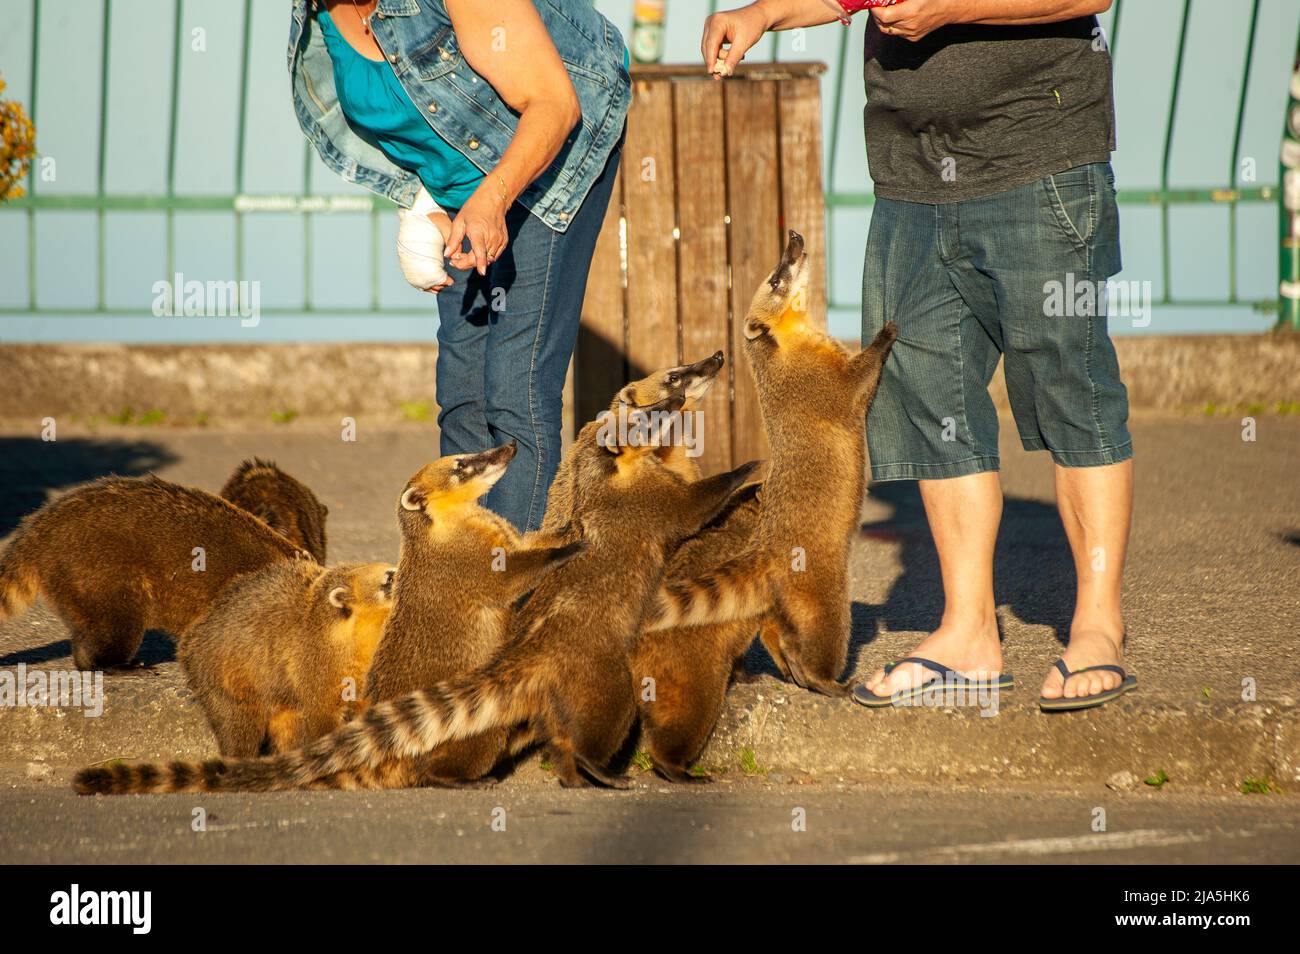 Wild Coatis begging to be feed by tourists come every day to the Serra do Rio do Rastro lookout point, Santa Catarina, Brazil Stock Photo